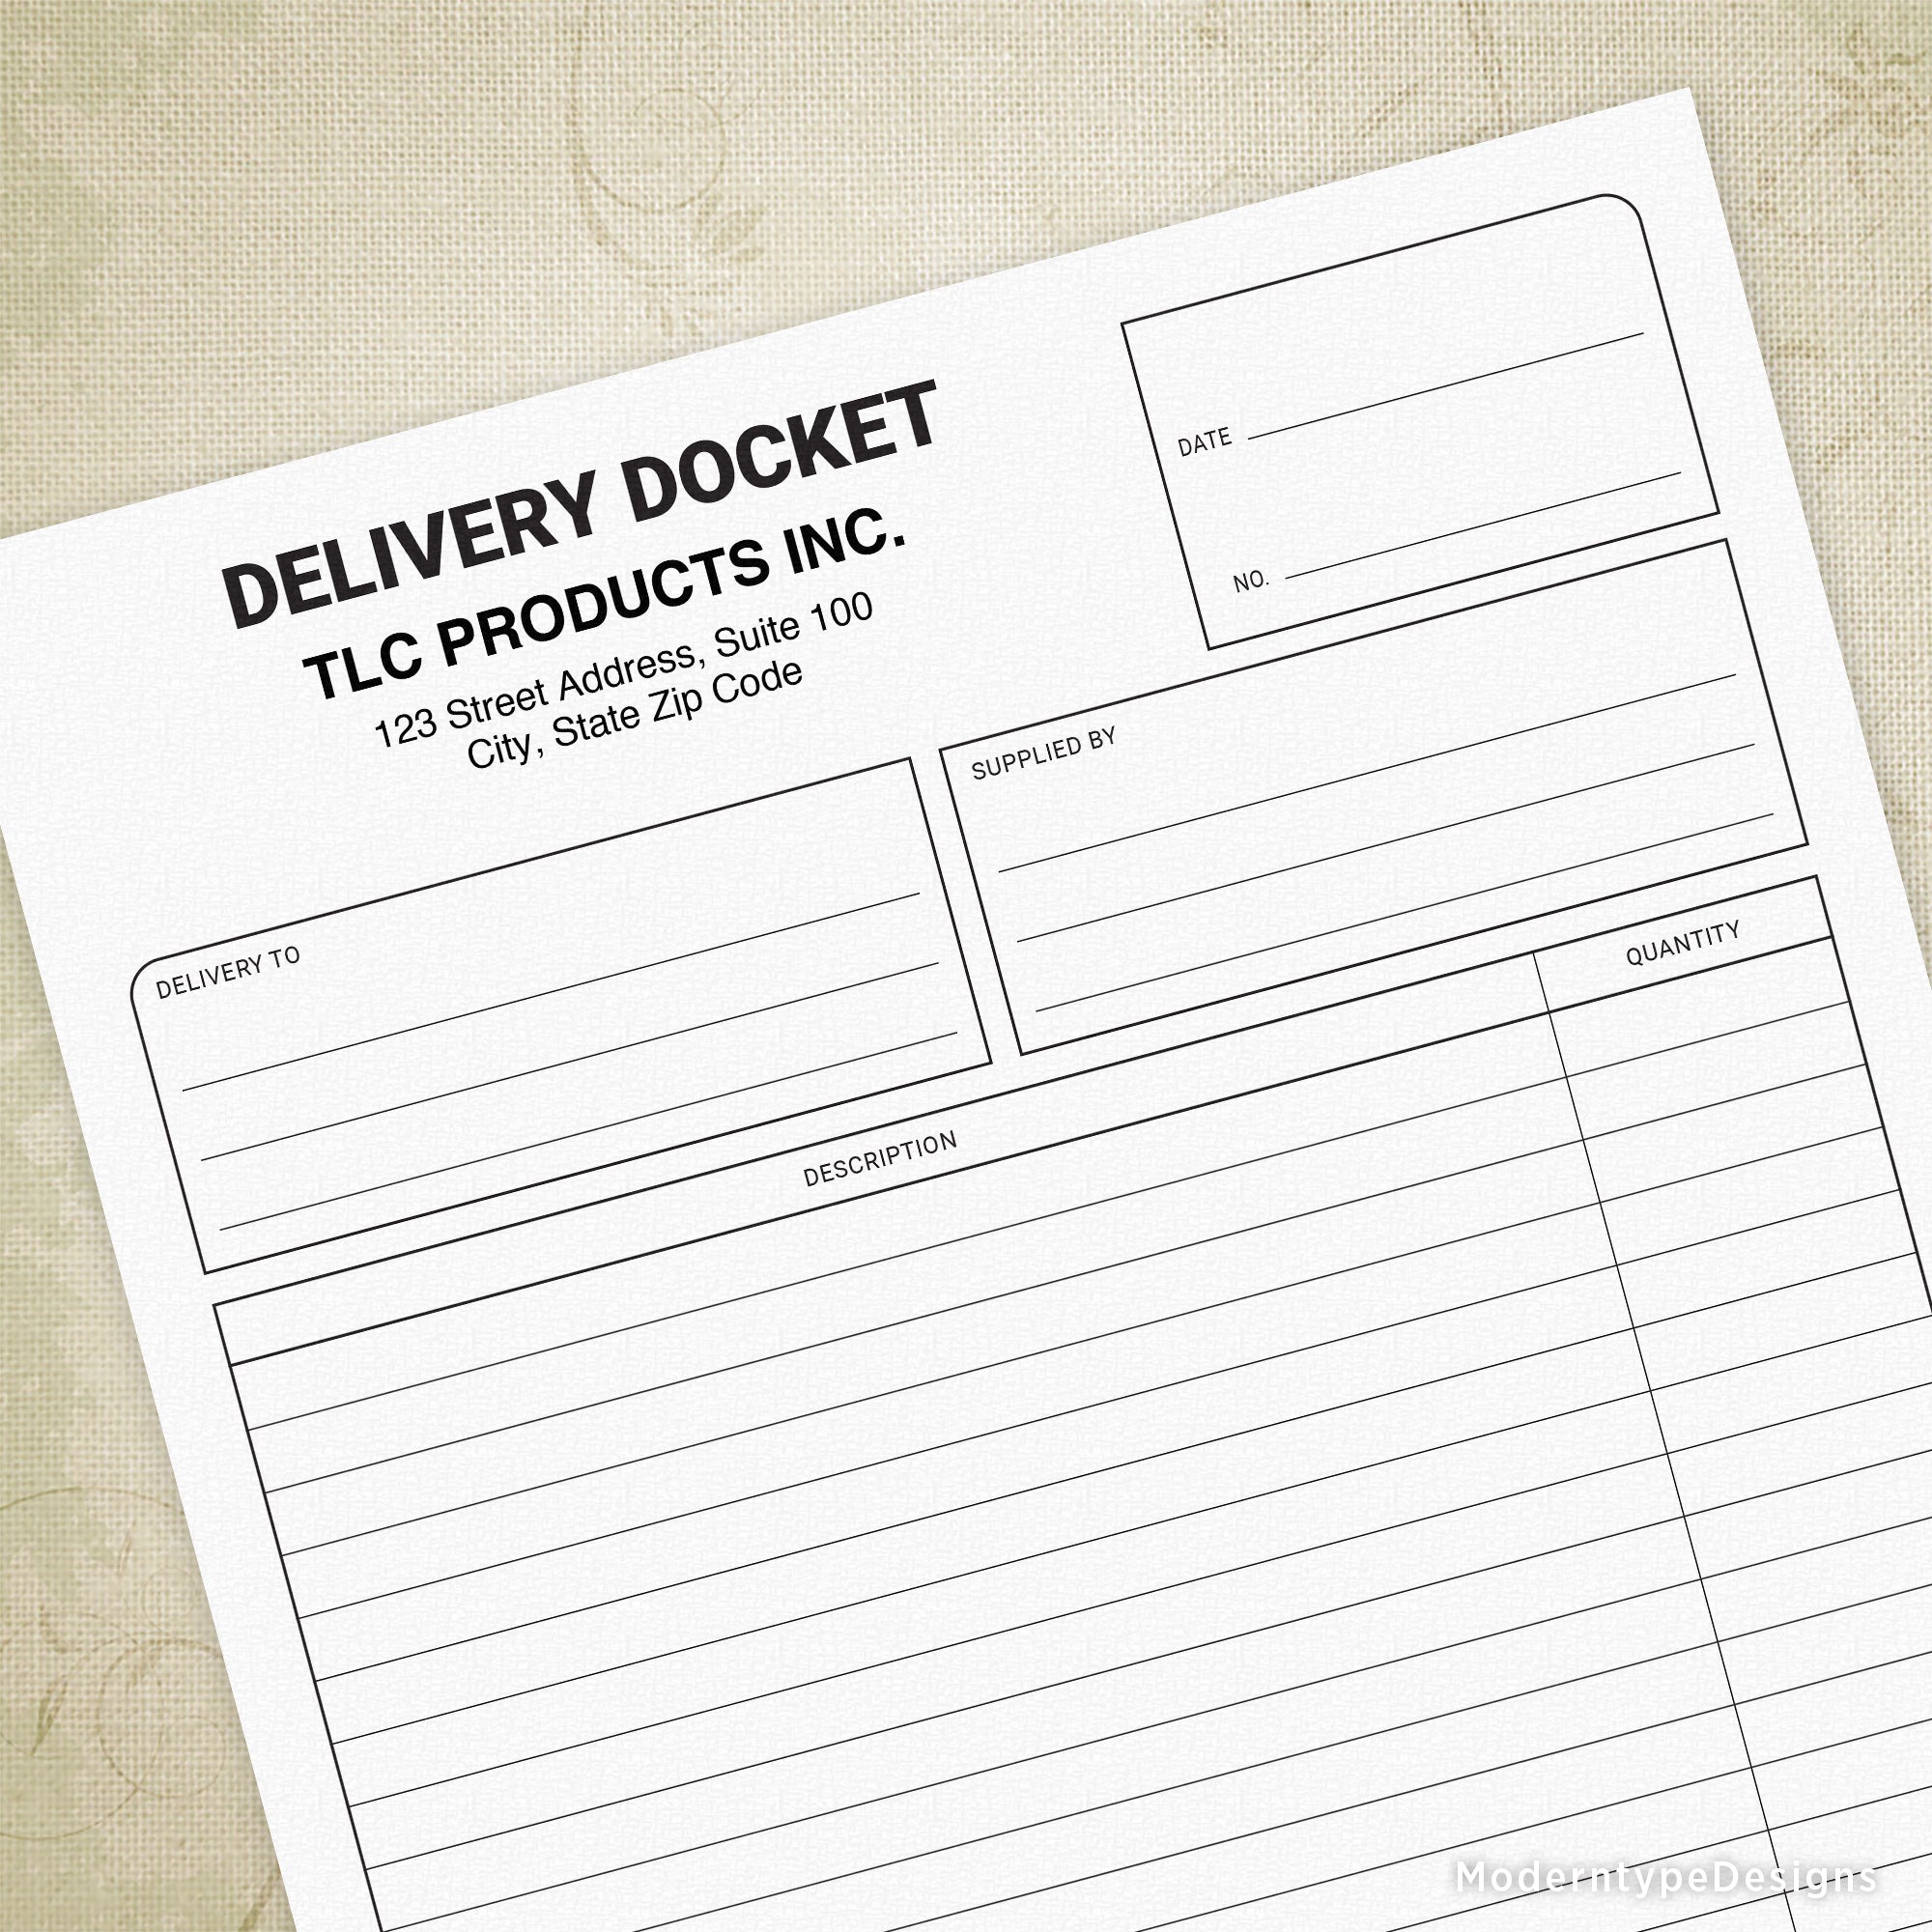 Delivery Docket Printable Form with Lines, Editable, #2